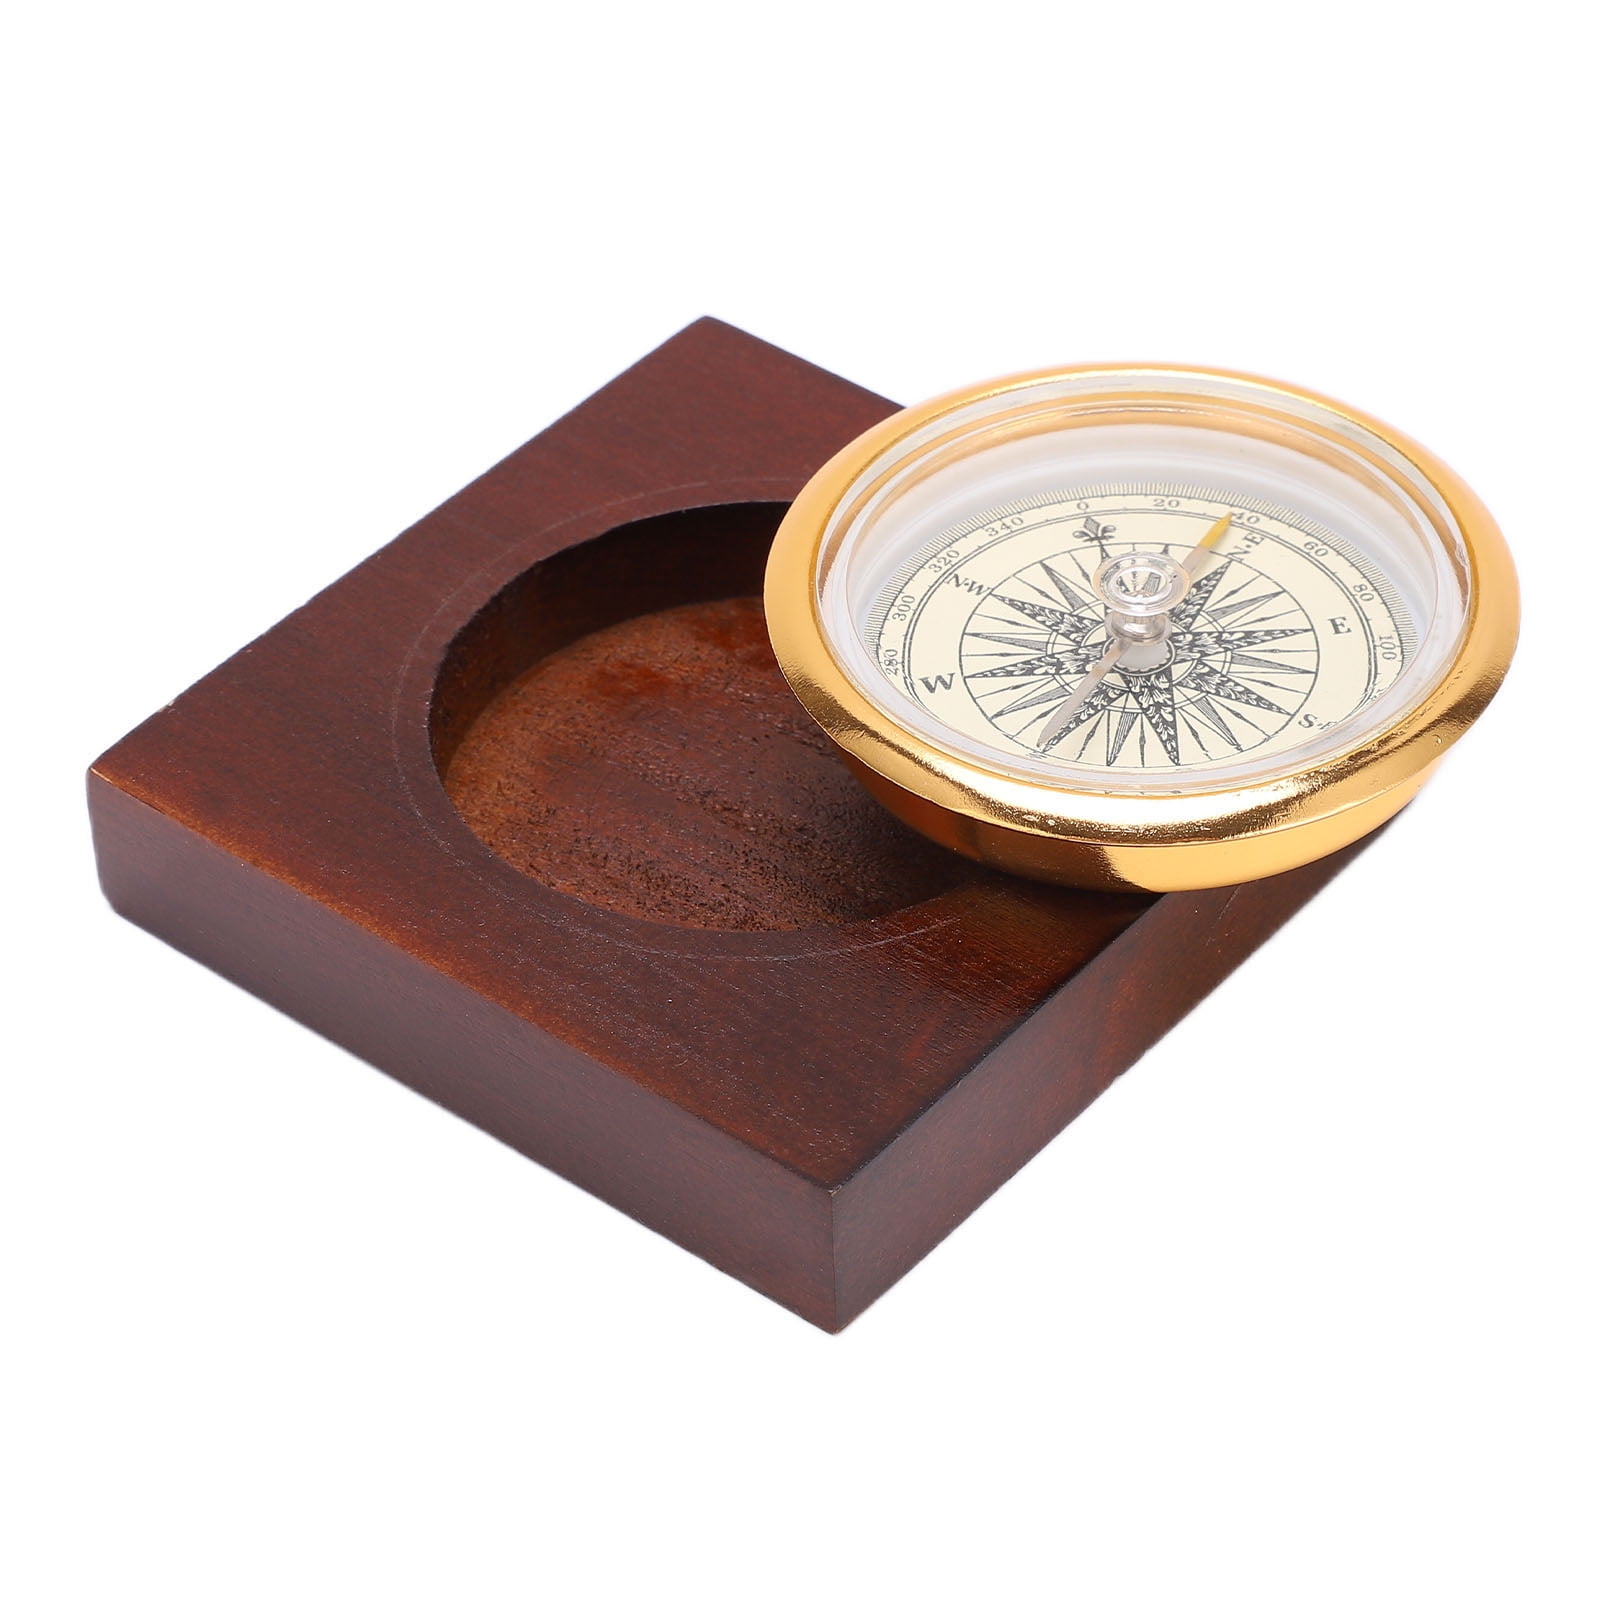 Wooden Box Compass, Practical Vintage Compass For For Hiking For